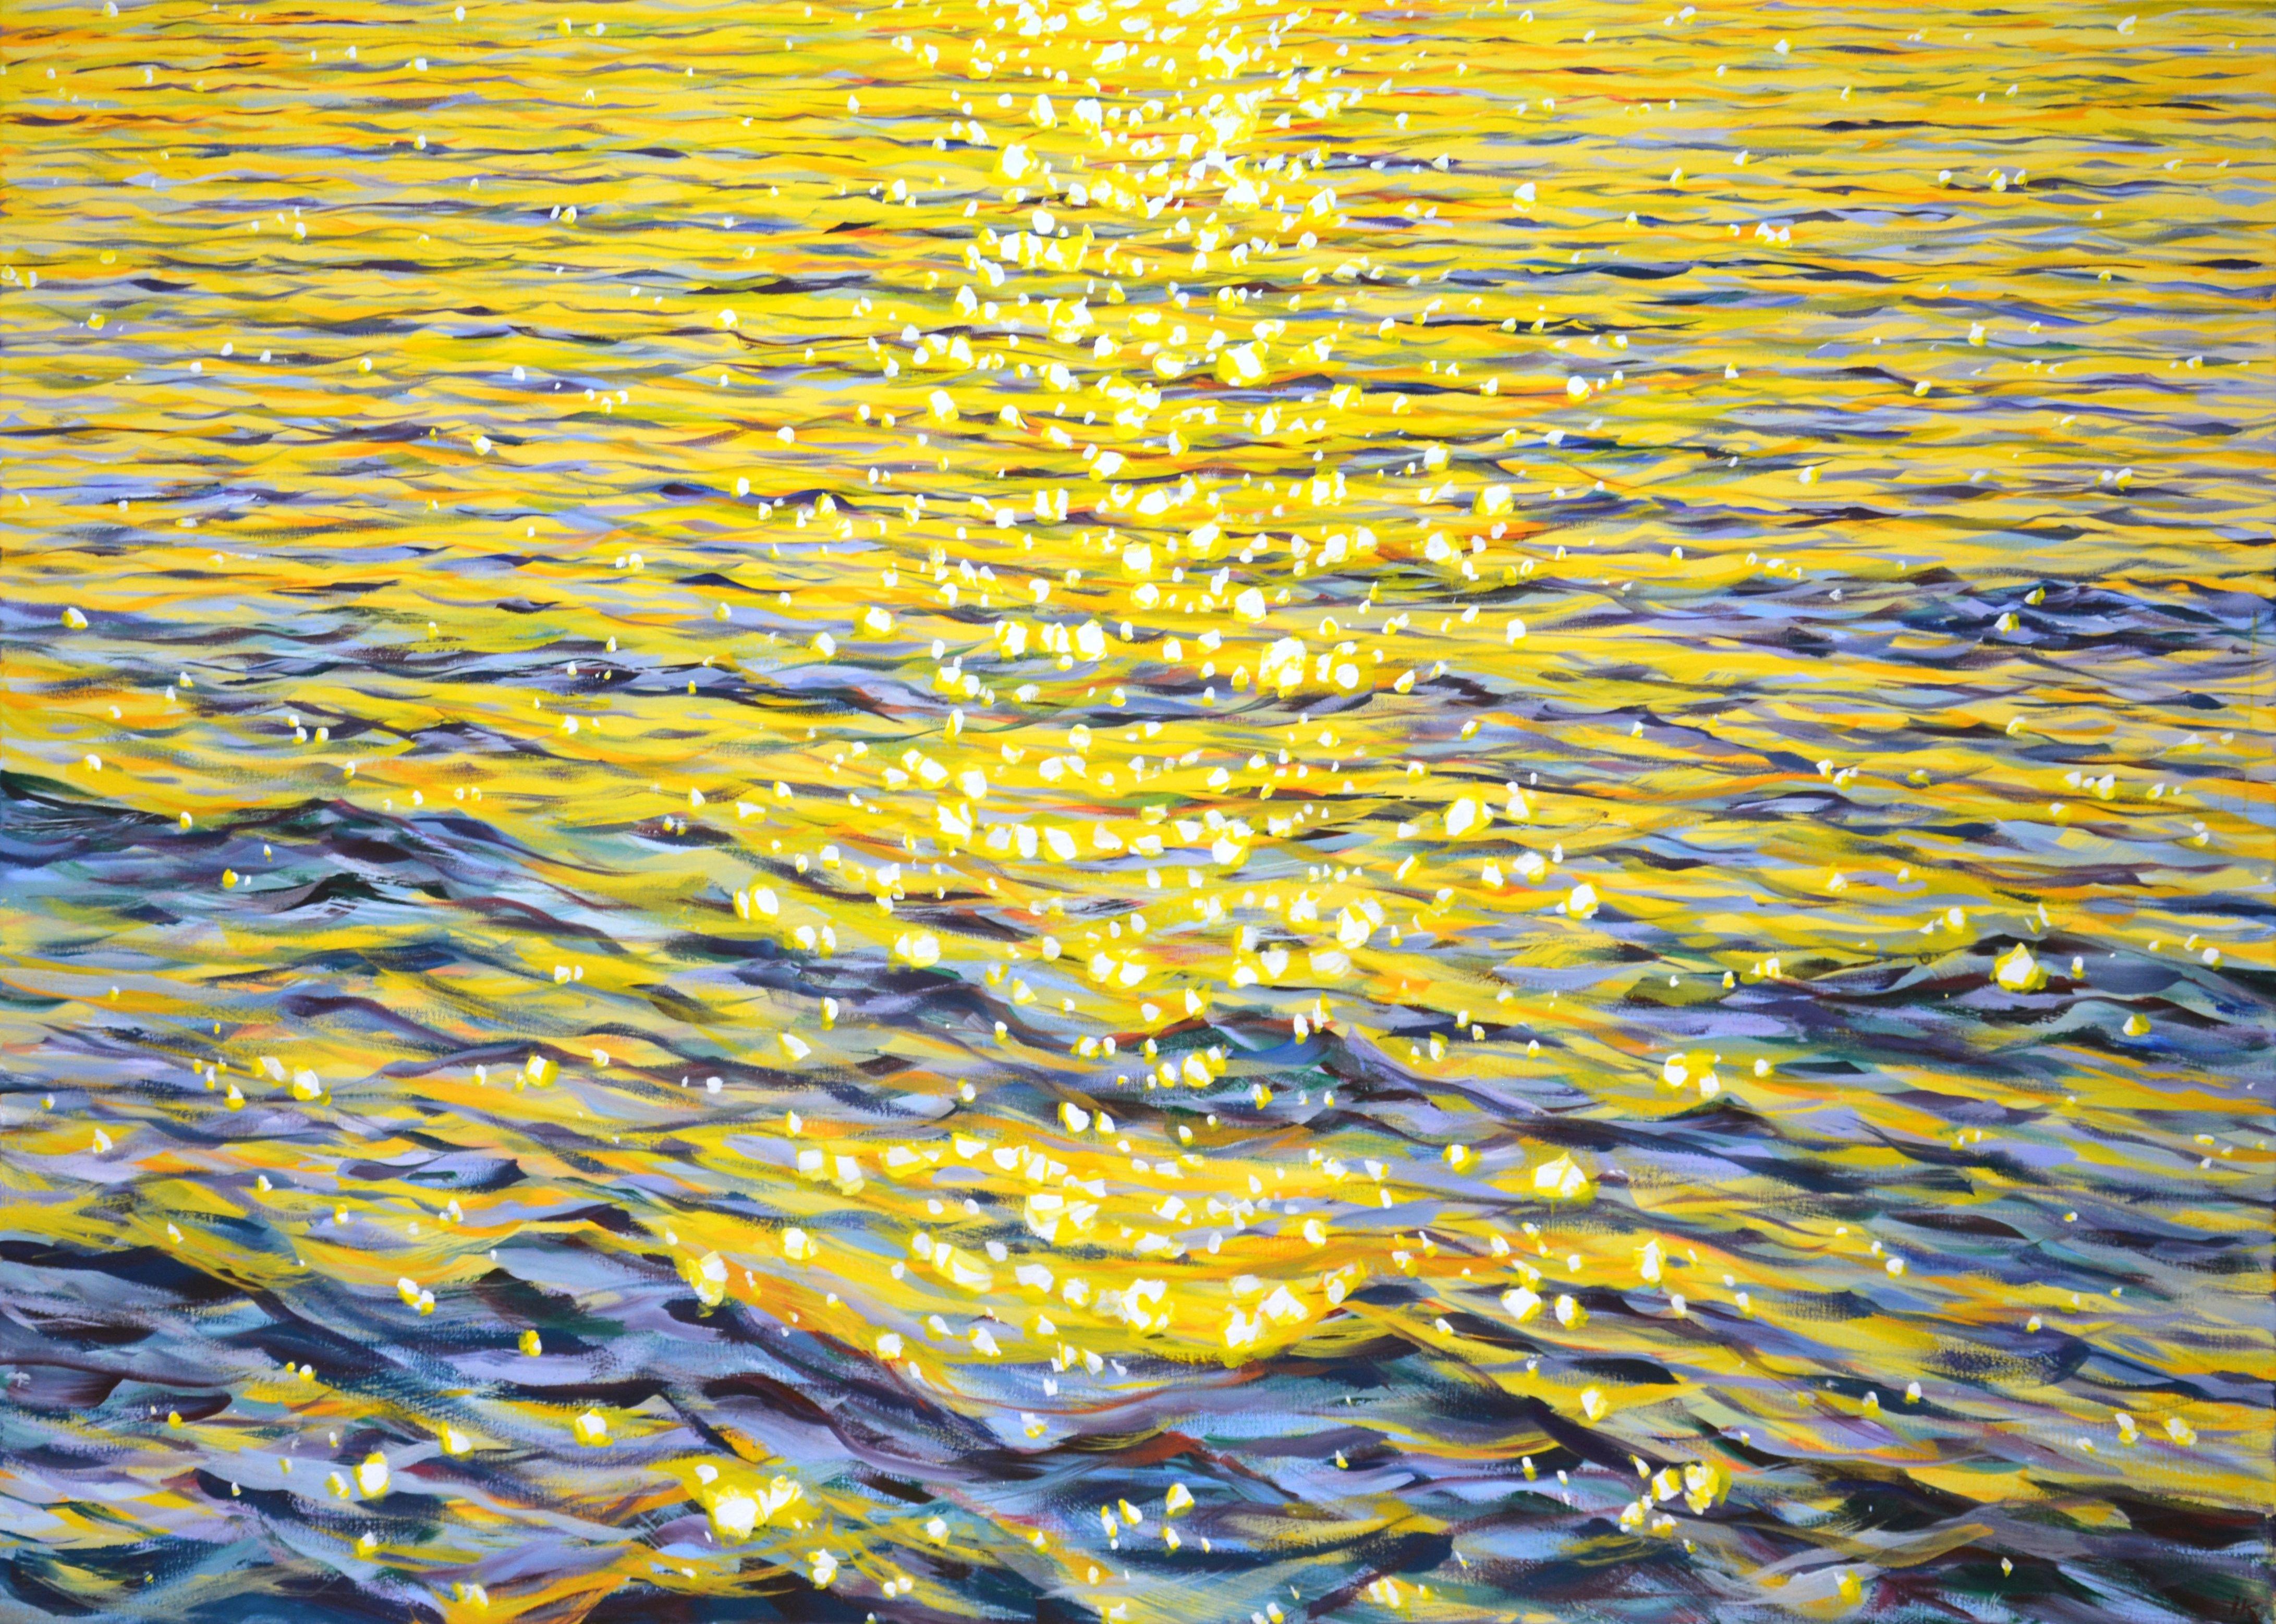 Dance of glare at sunset. Warm water, waves, serene views, ocean shine, glare of the evening sun on the water create an atmosphere of relaxation and romance. Made in the style of realism, in a calm palette with warm water and golden highlights. Part